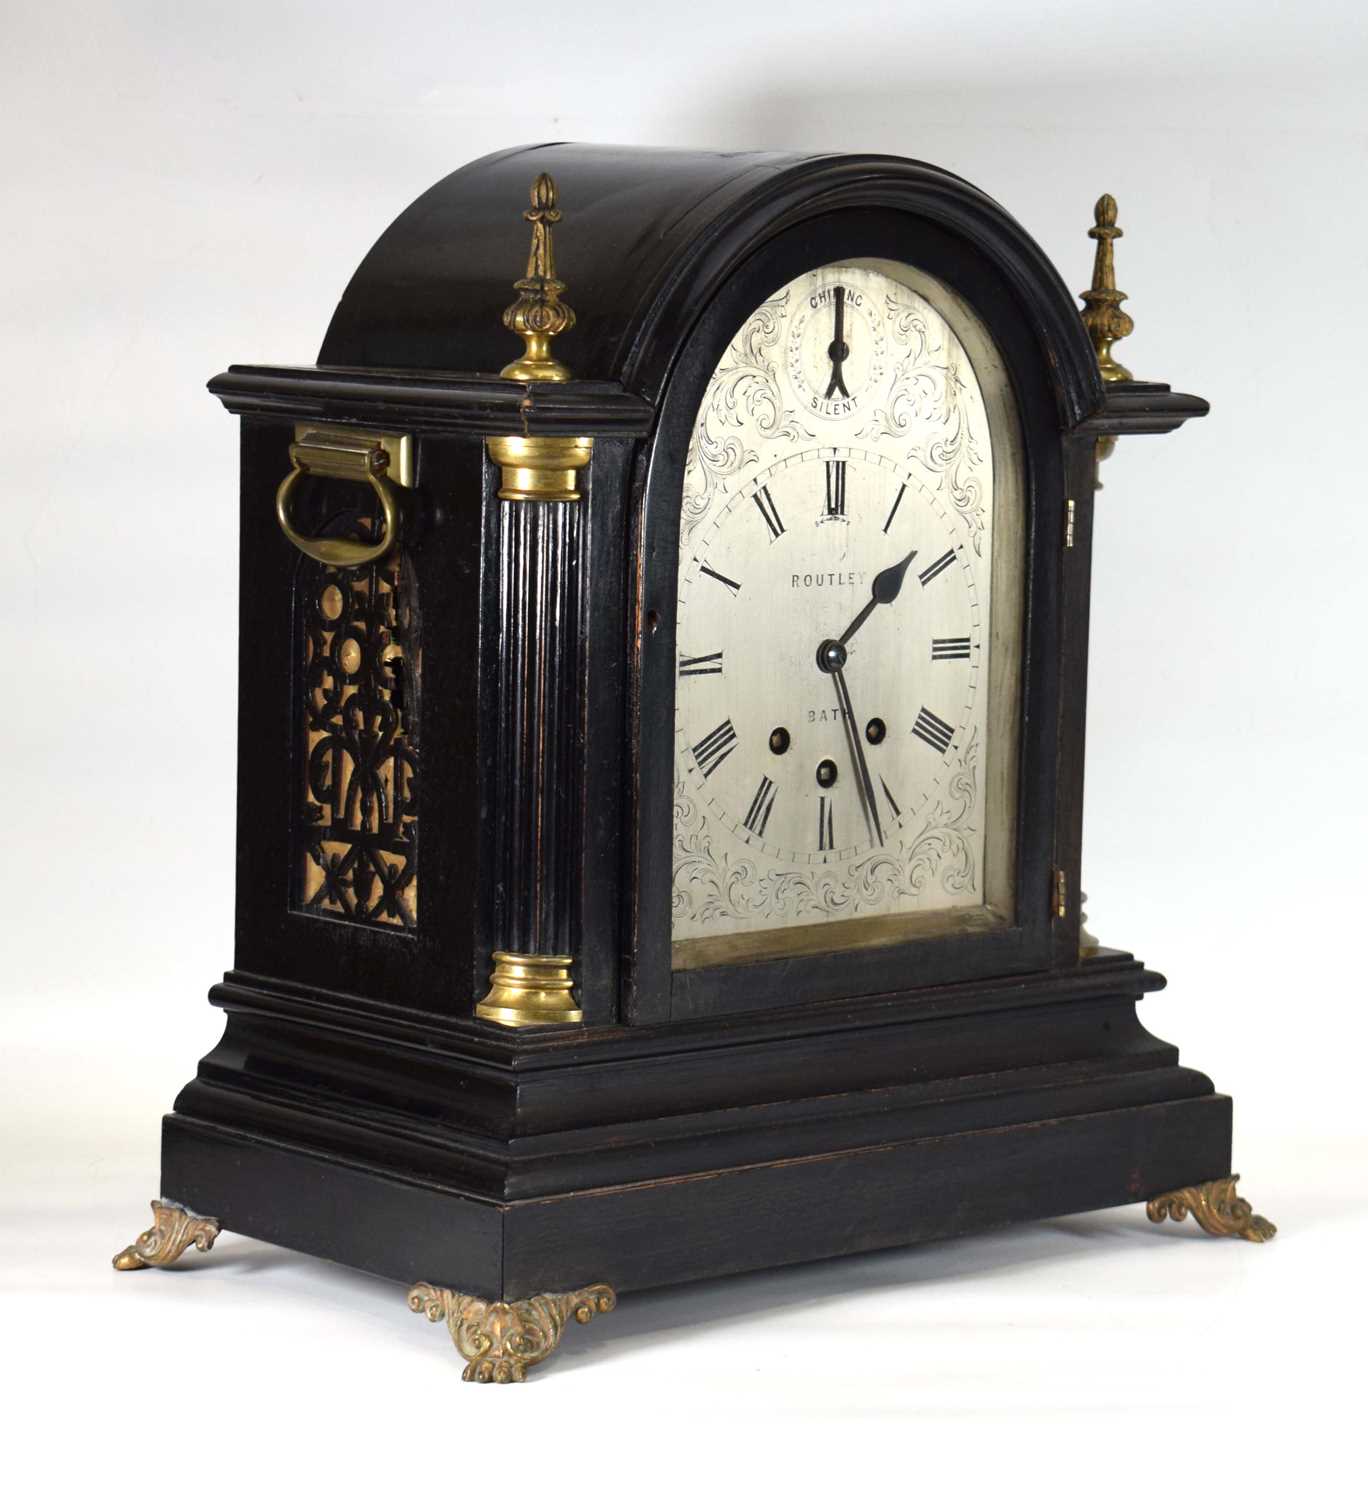 Edwin Routley of Bath, a mid-Victorian bracket clock, the movement chiming on eight concentric bells